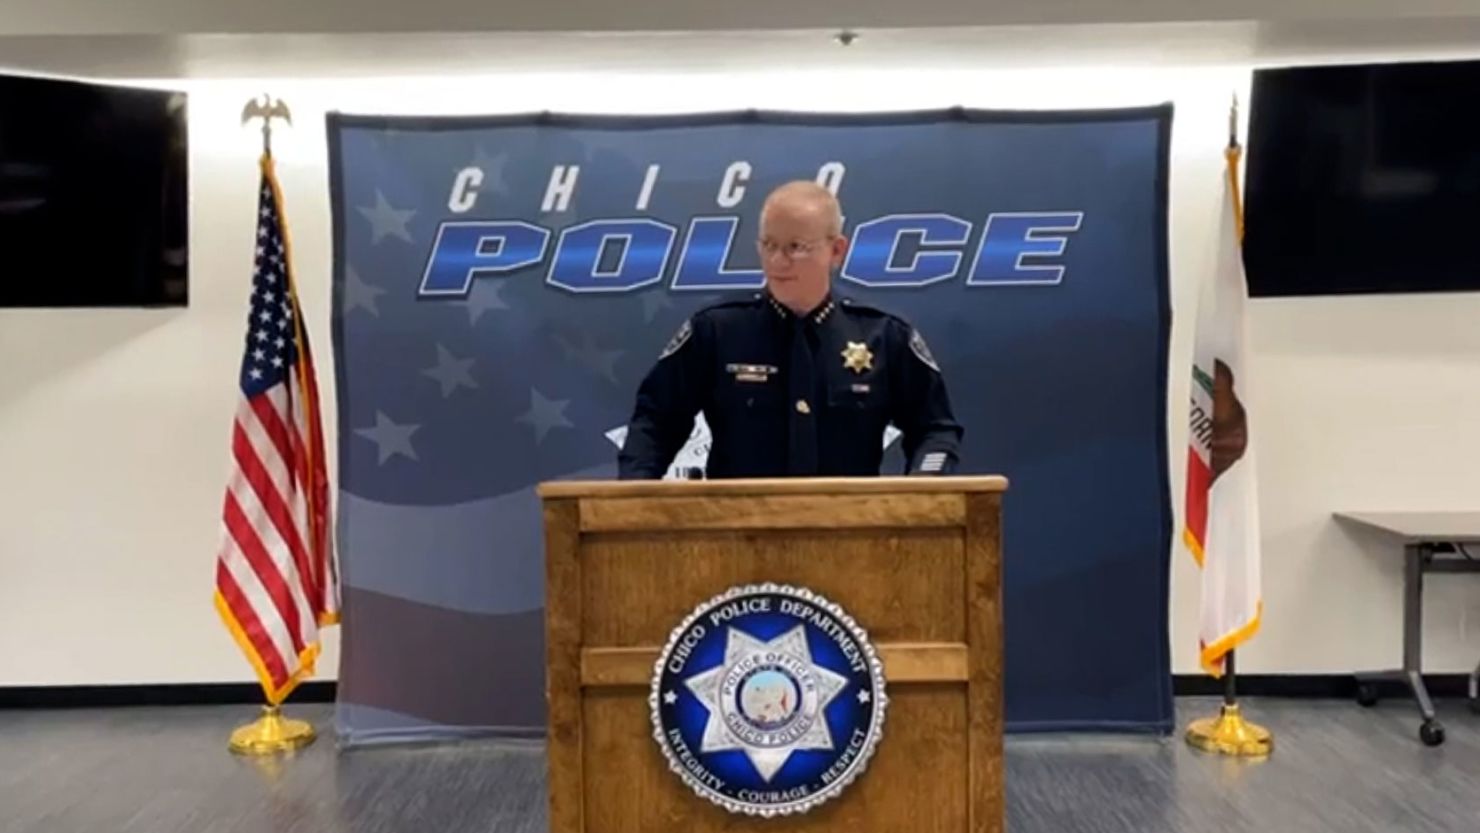 The Chico Police Department on Saturday morning gives a media briefing about the overnight shooting at a large party in Chico, California.